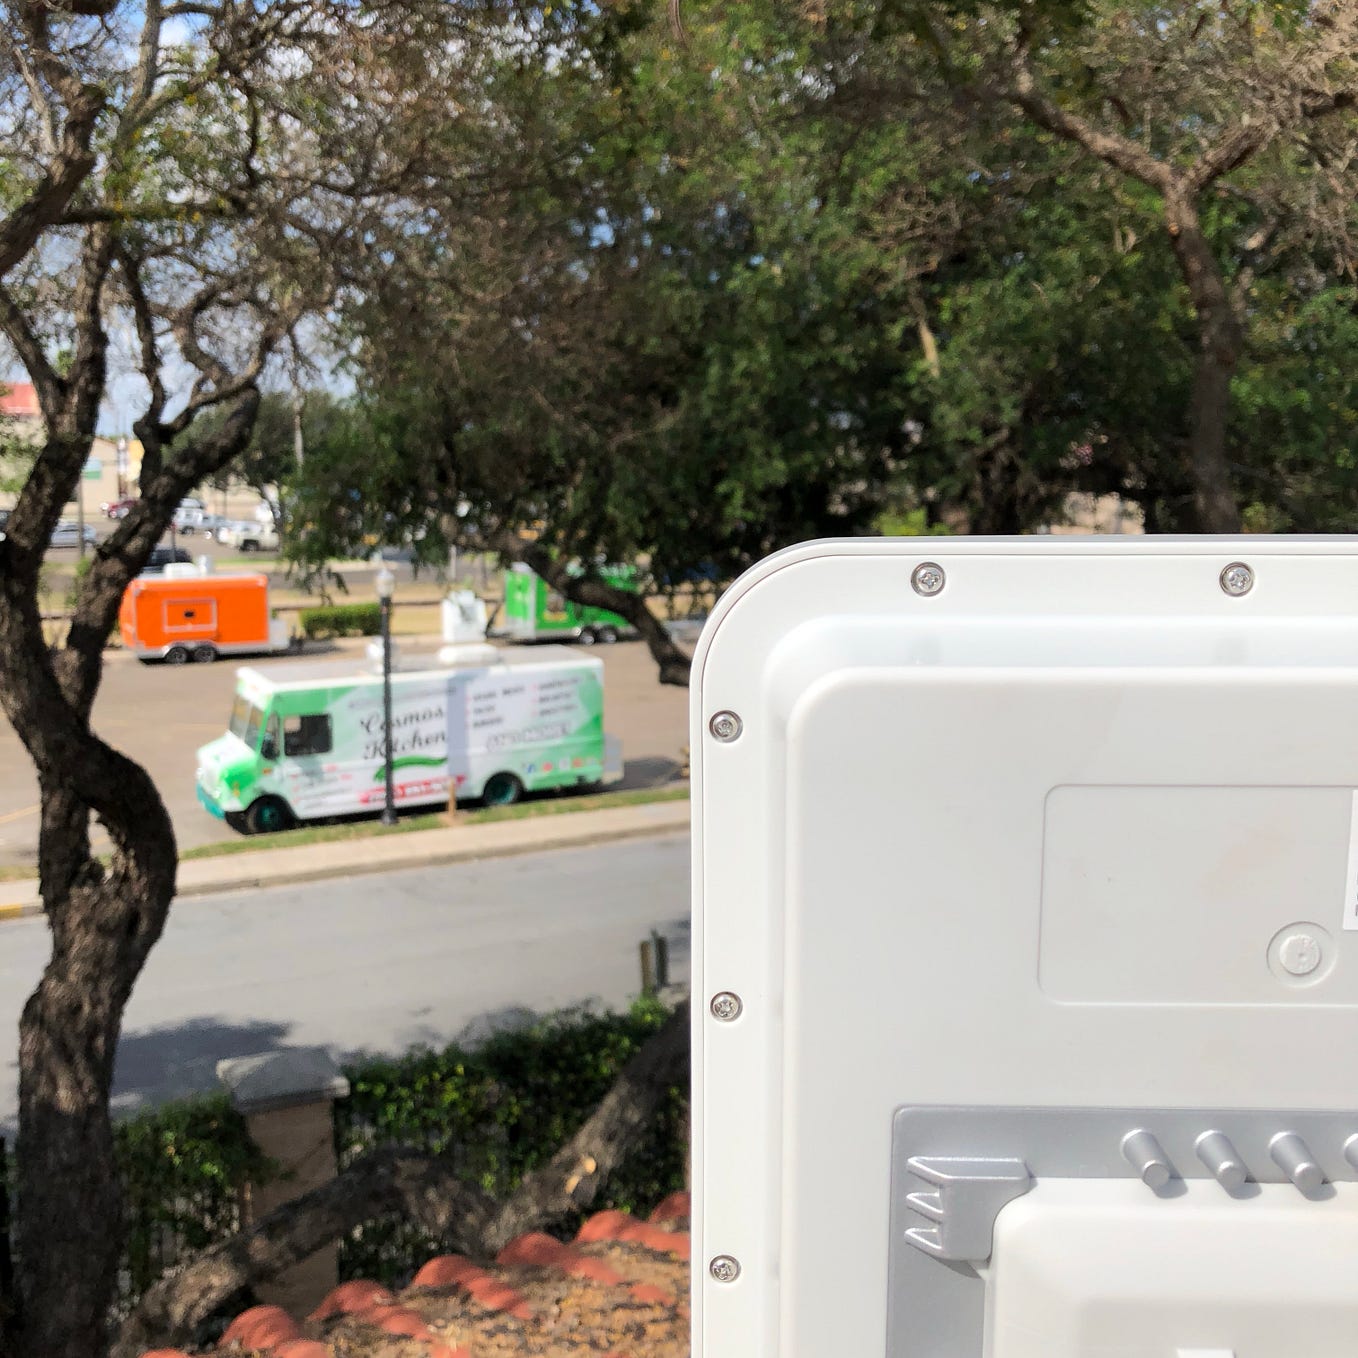 Hands-On With the Cambium Networks Outdoor e700 Access Point